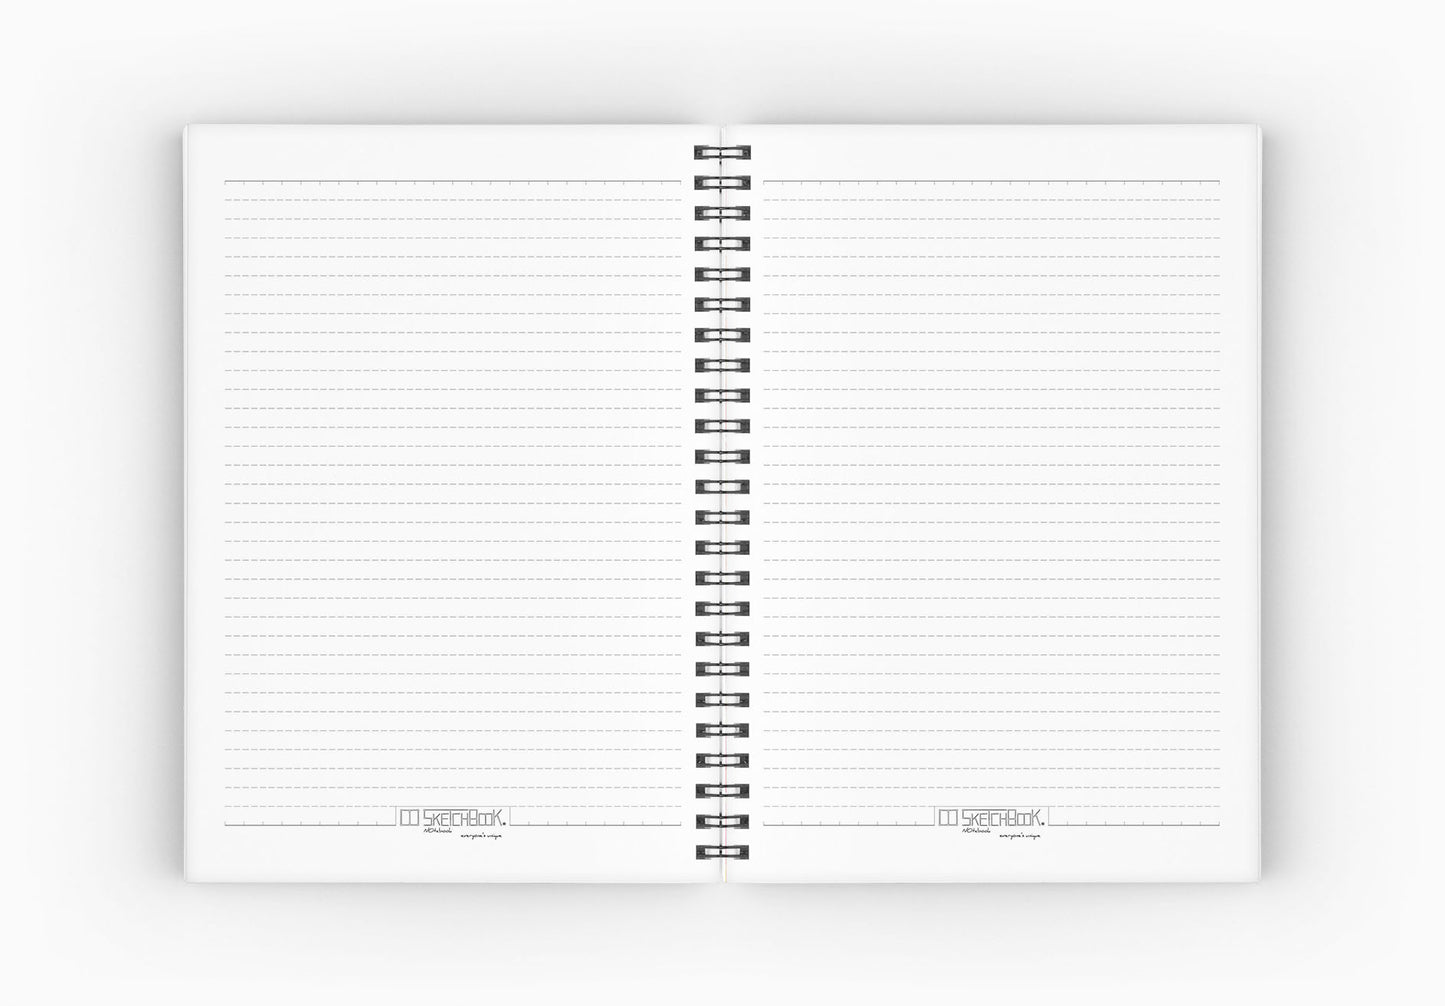 Weekly Planner Set | 20 X 14 cm - (Cities Edition) - London - from SketchBook Stationery